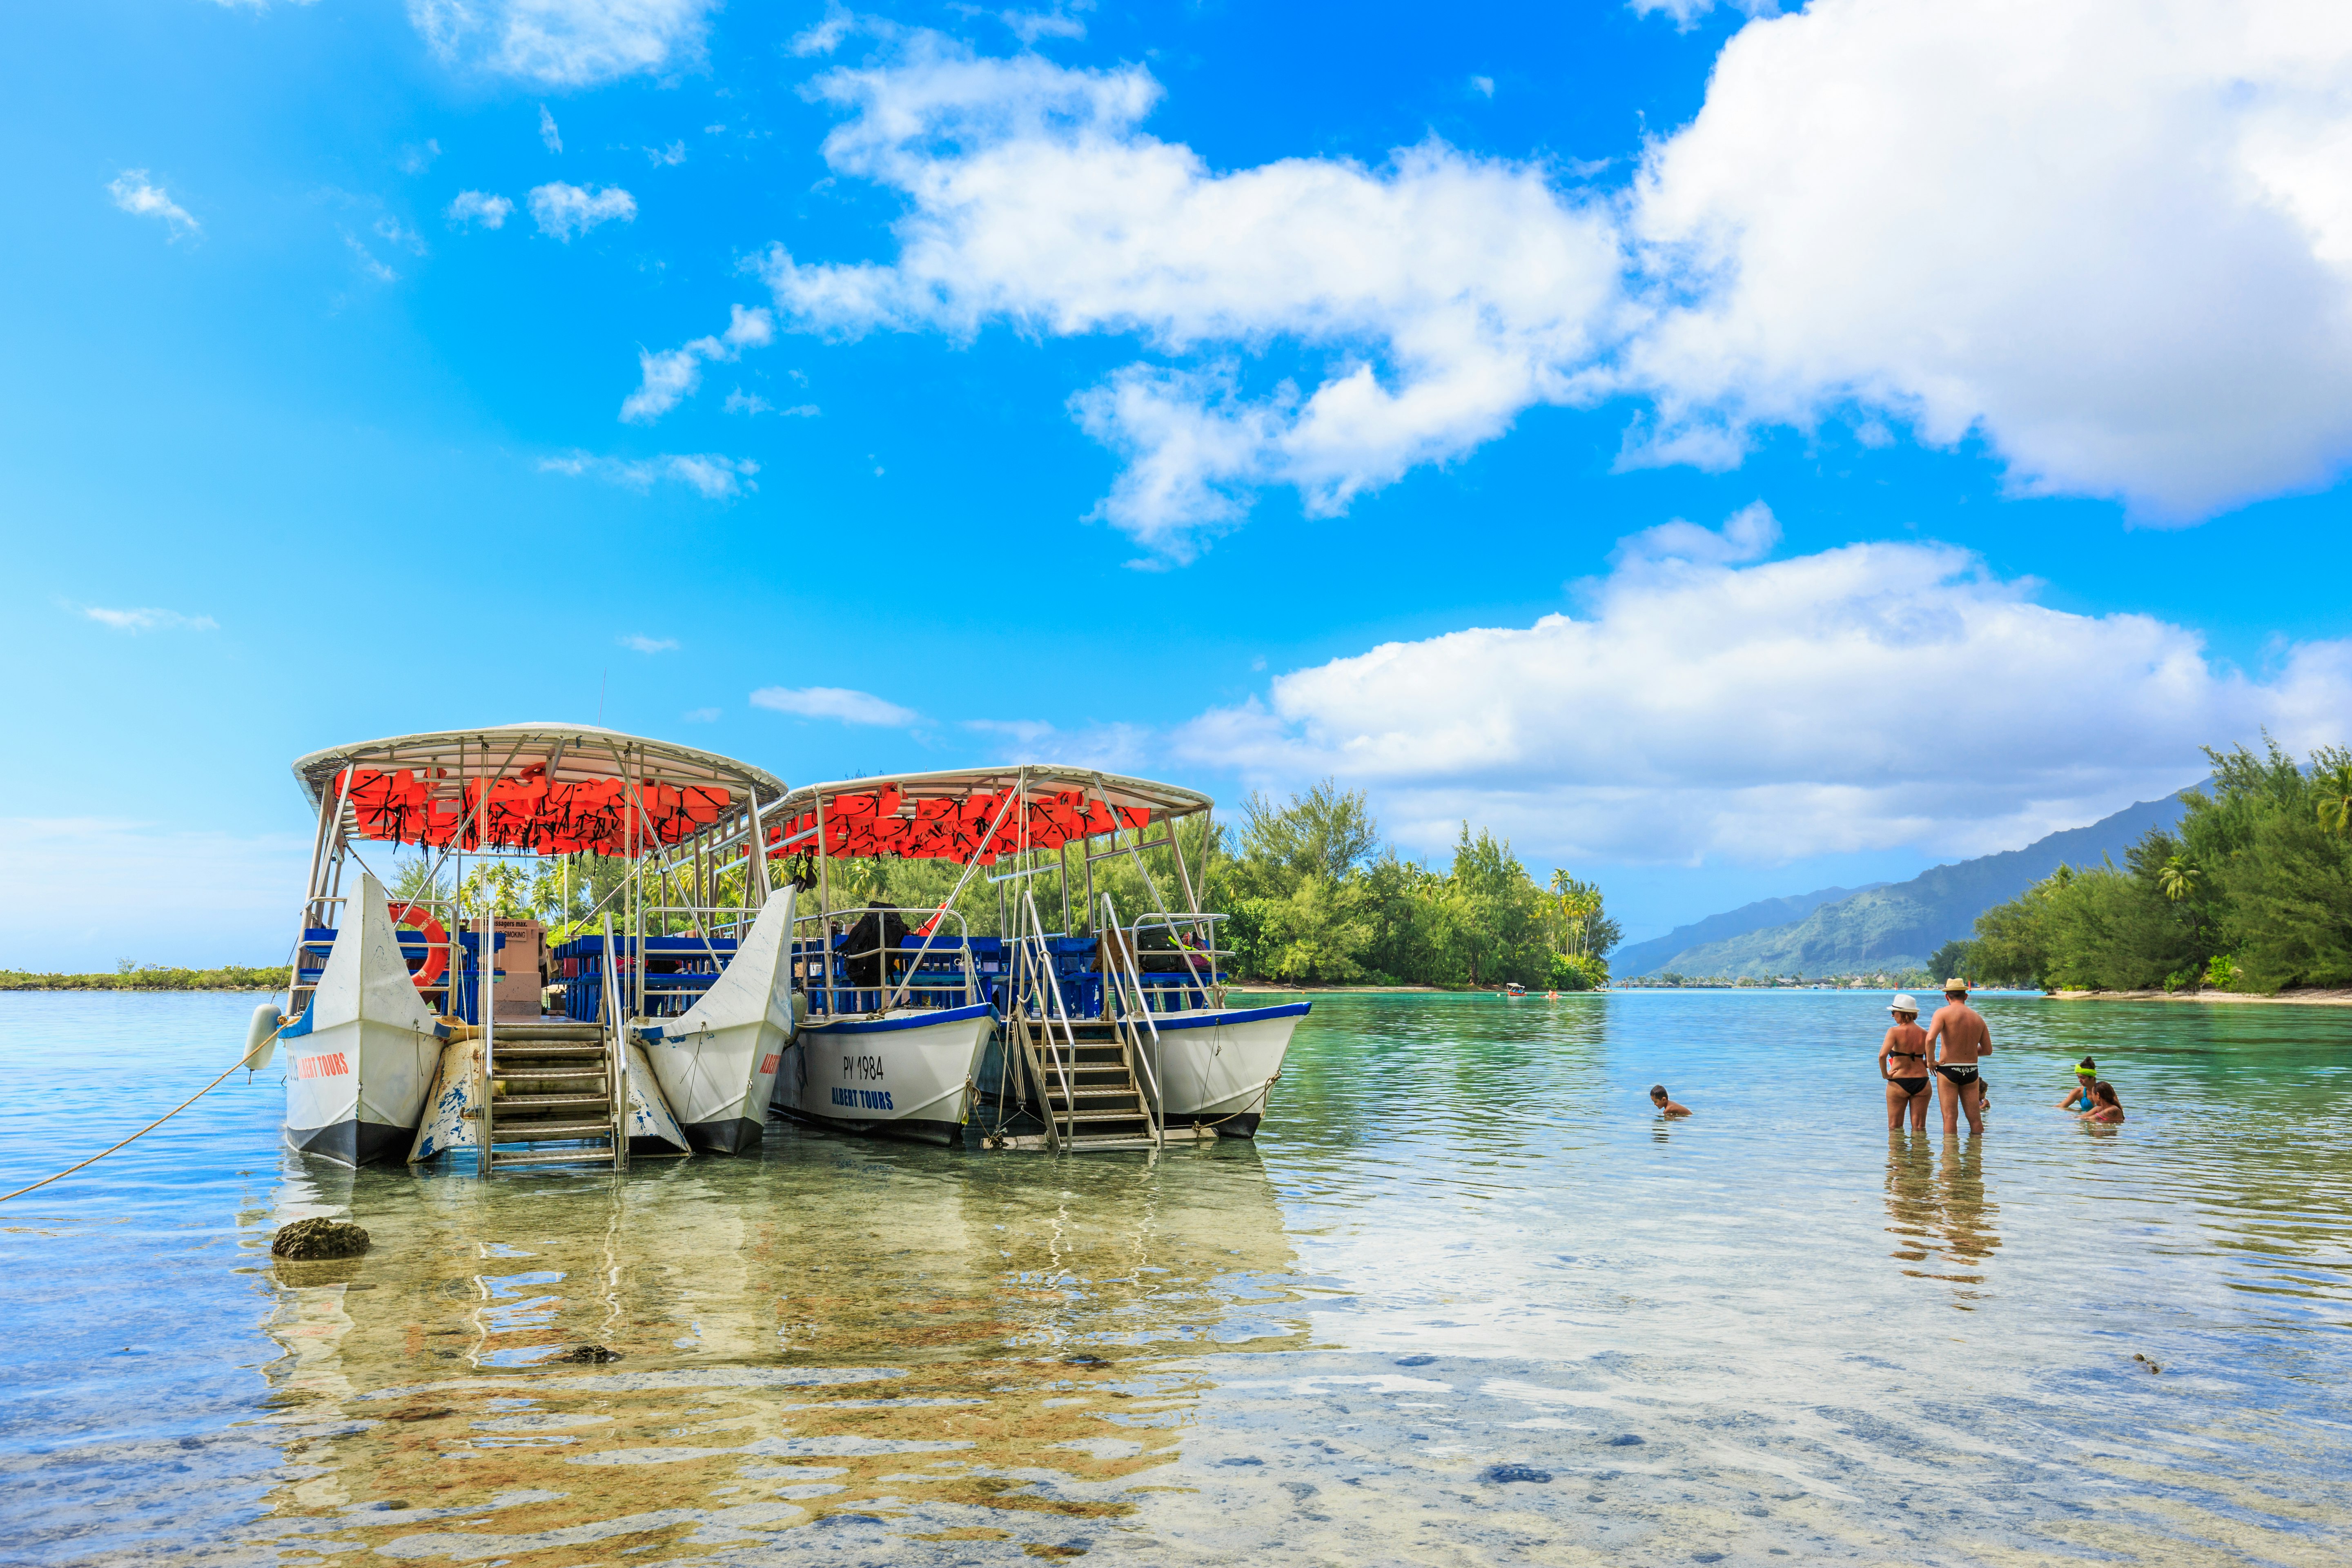 Two passenger boats moored in the shallow waters of Mo'orea Island as tourists snorkel and paddle beside.